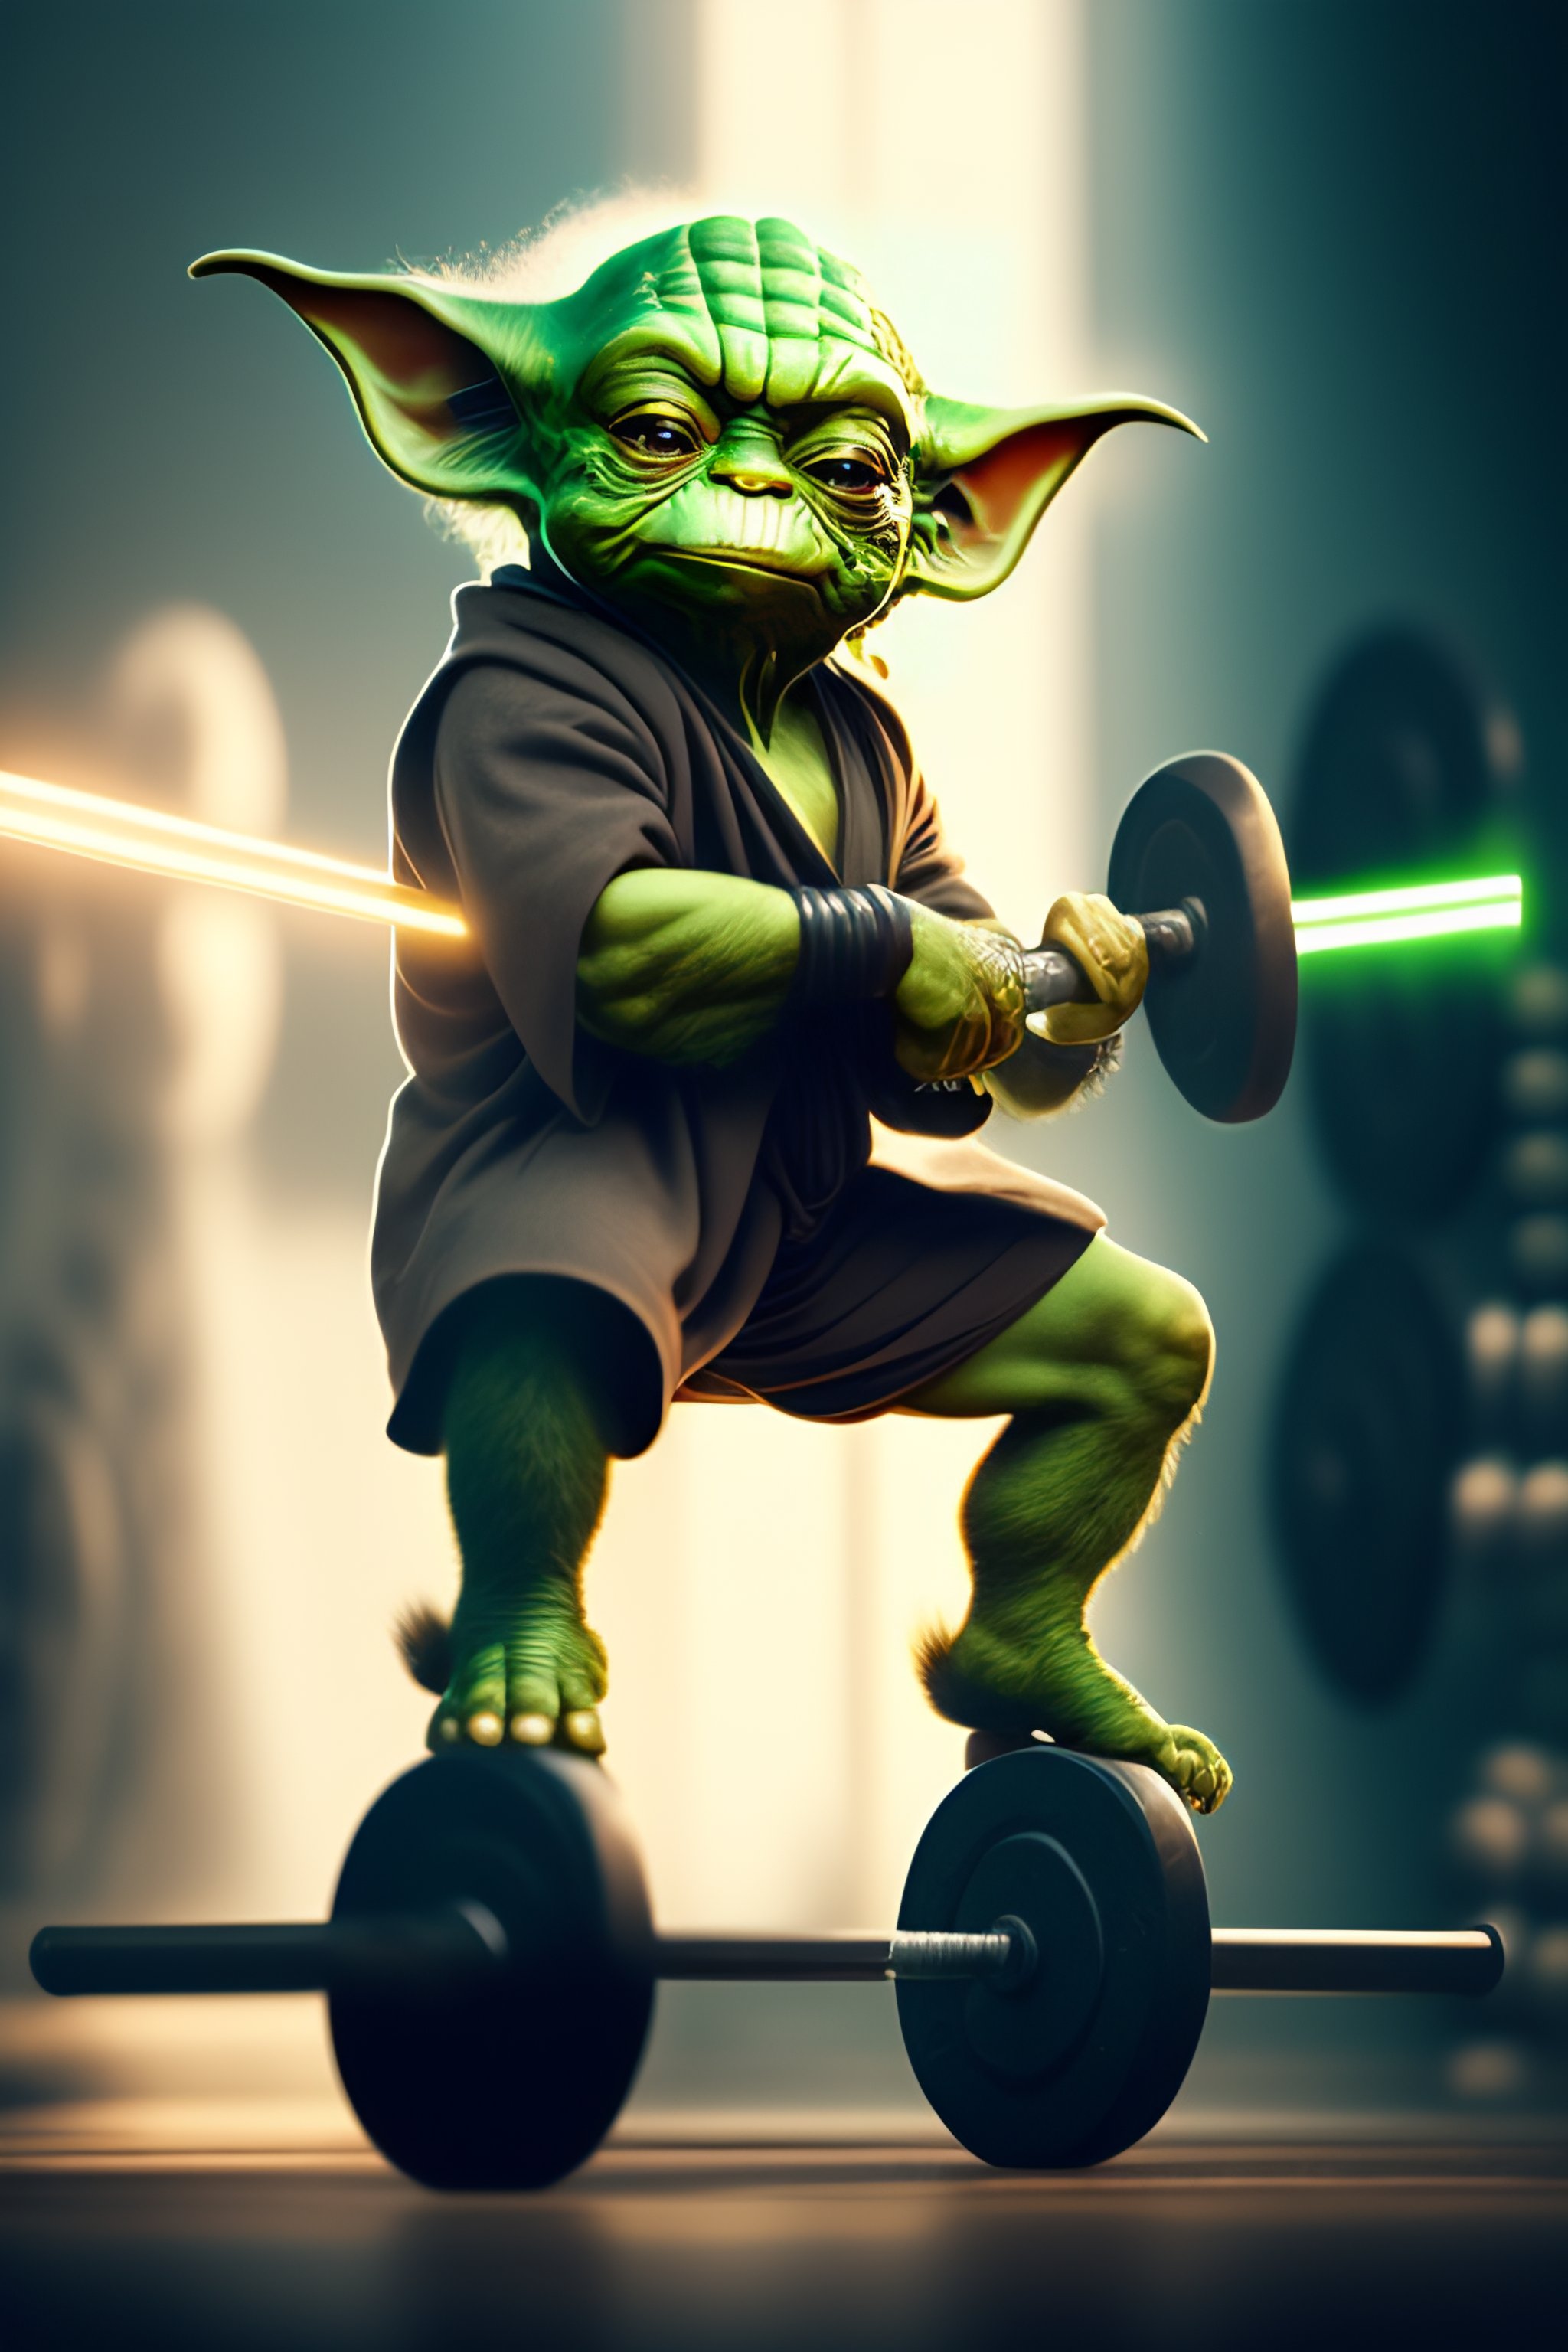 Lexica - Weight-lifting yoda using the force